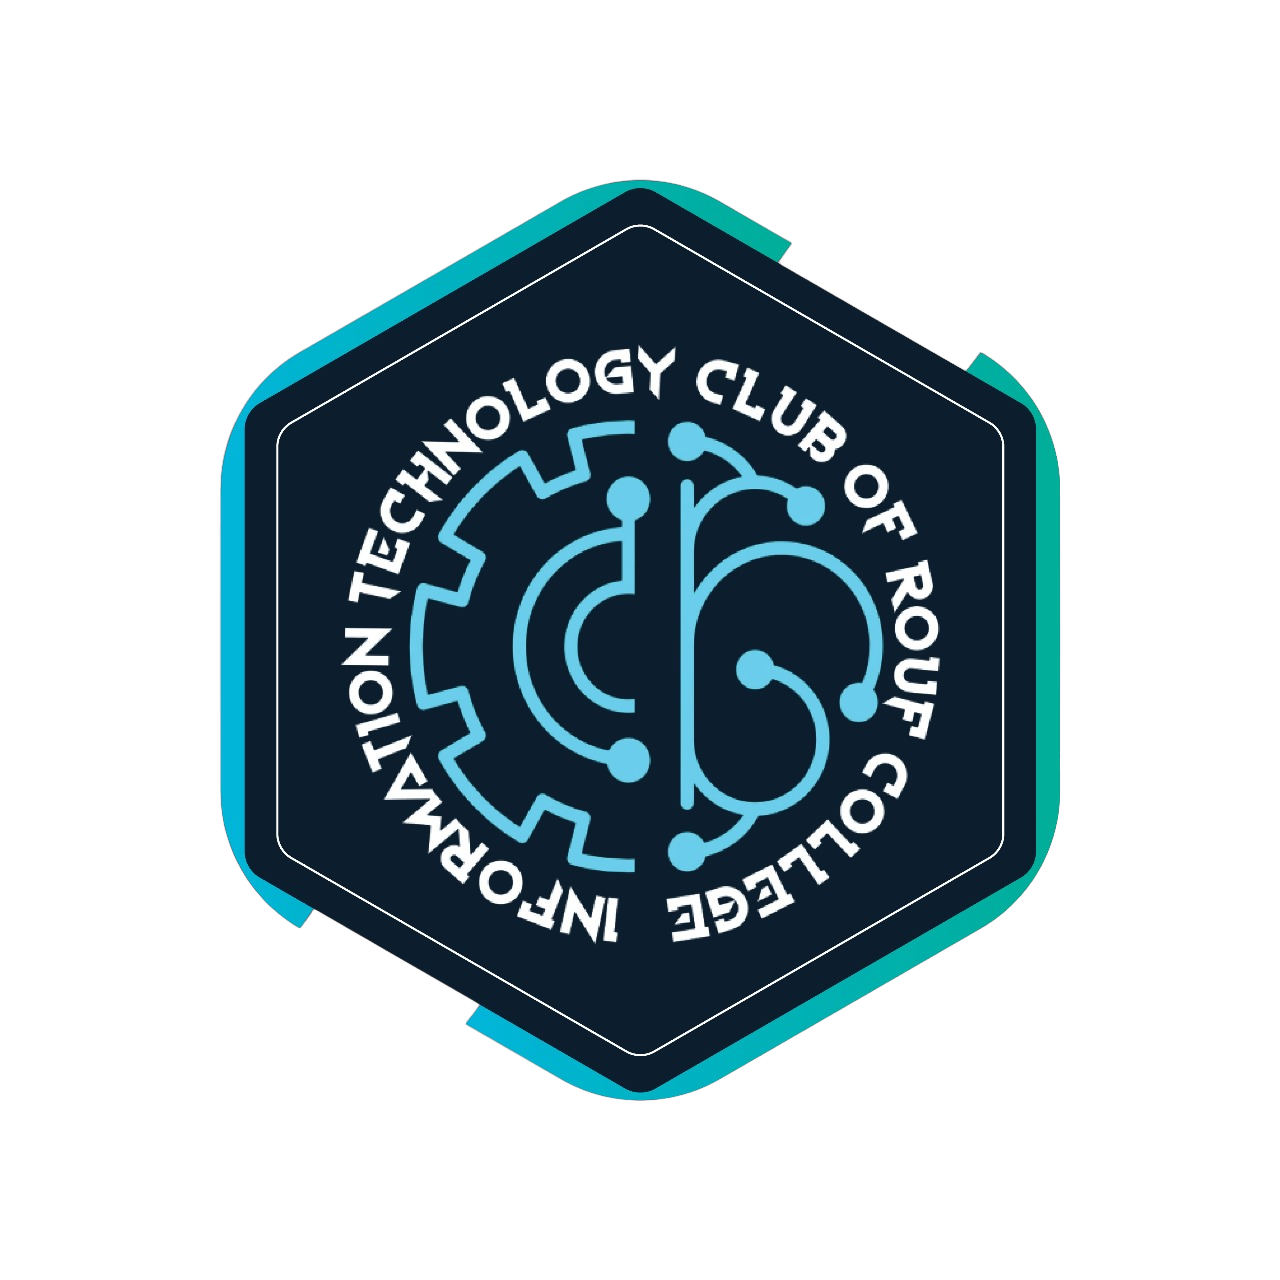 Information Technology Club of Rouf College